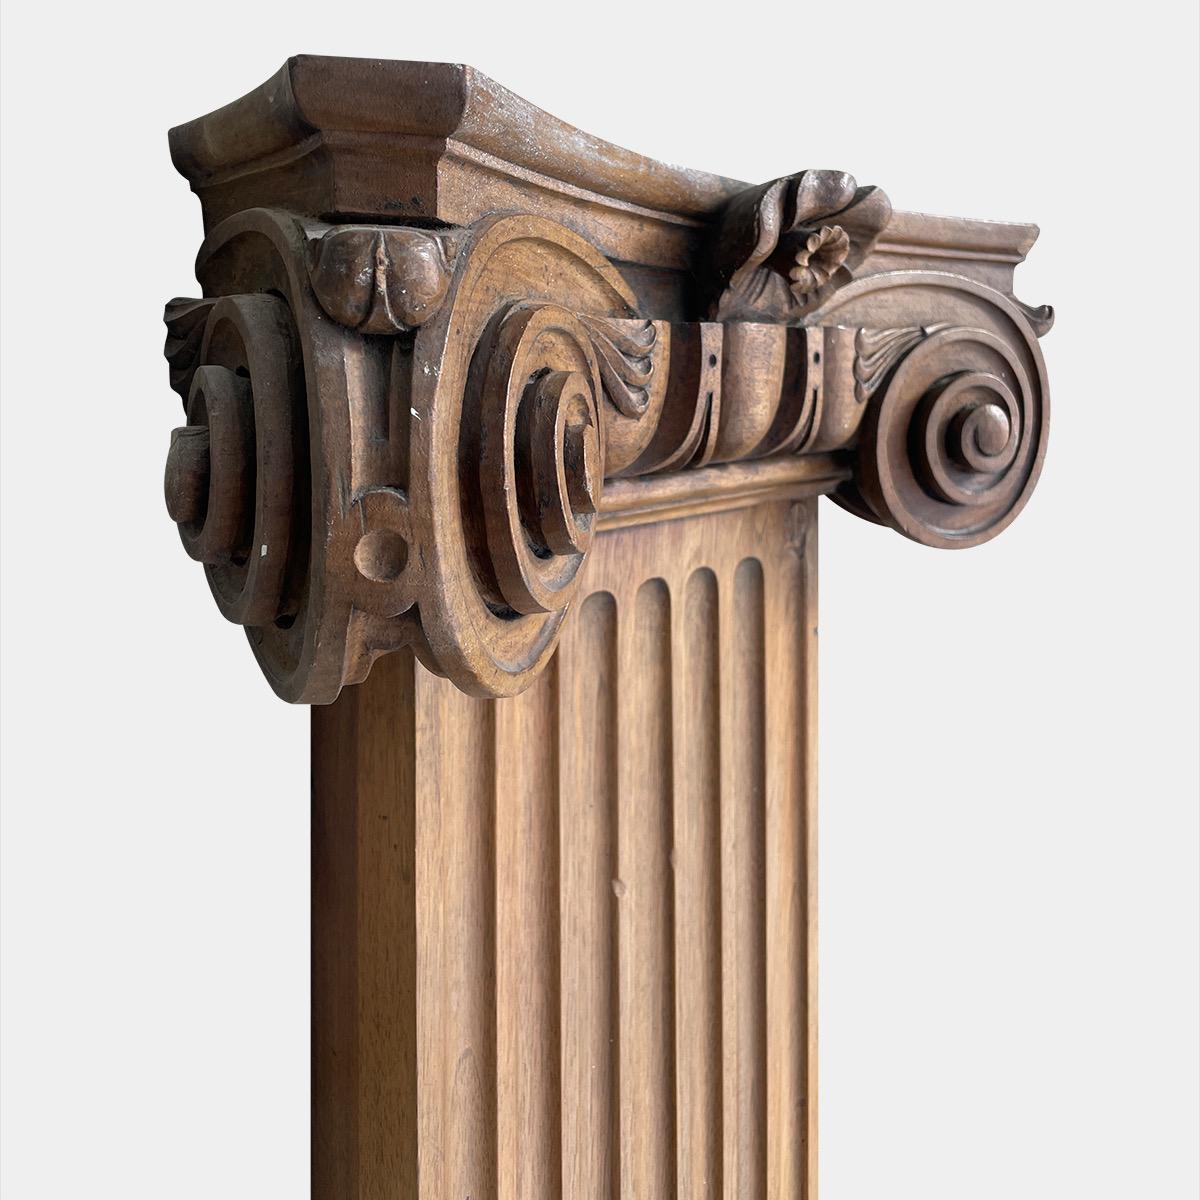 English Pair of Tall Carved Walnut Ionic Pilaster/Columns